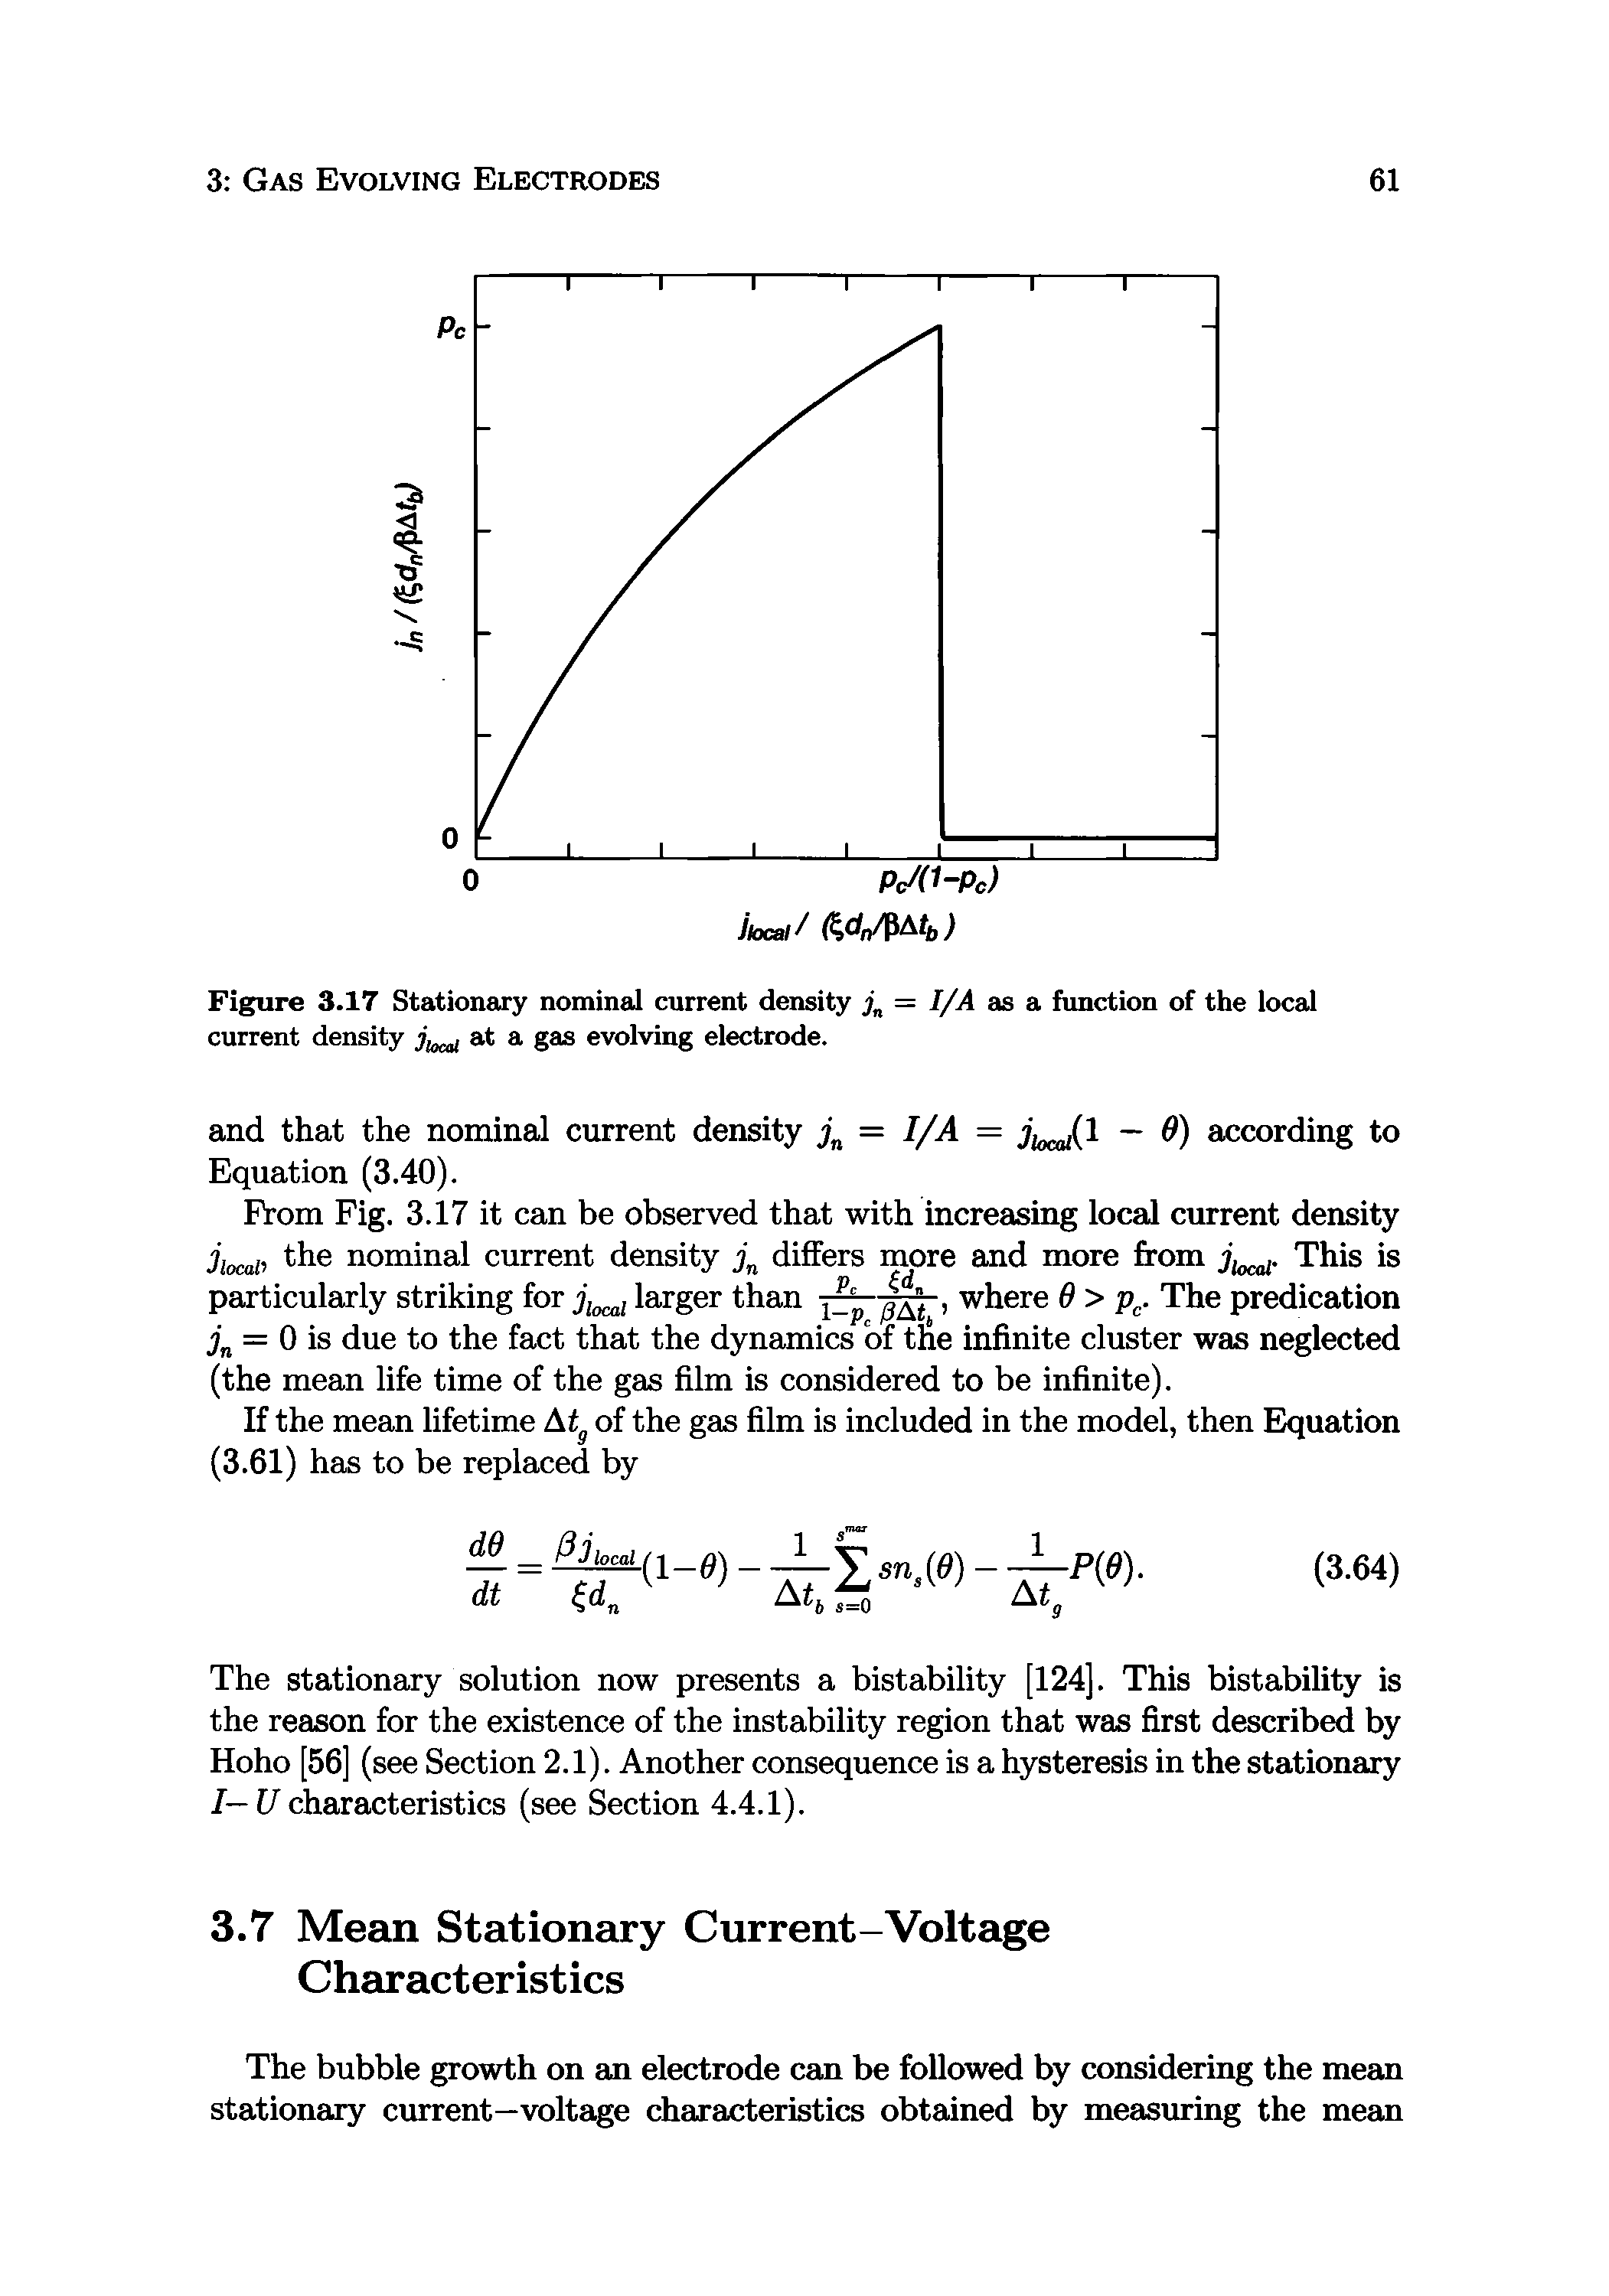 Figure 3.17 Stationary nominal current density j = I/A as a function of the local current density at a gas evolving electrode.